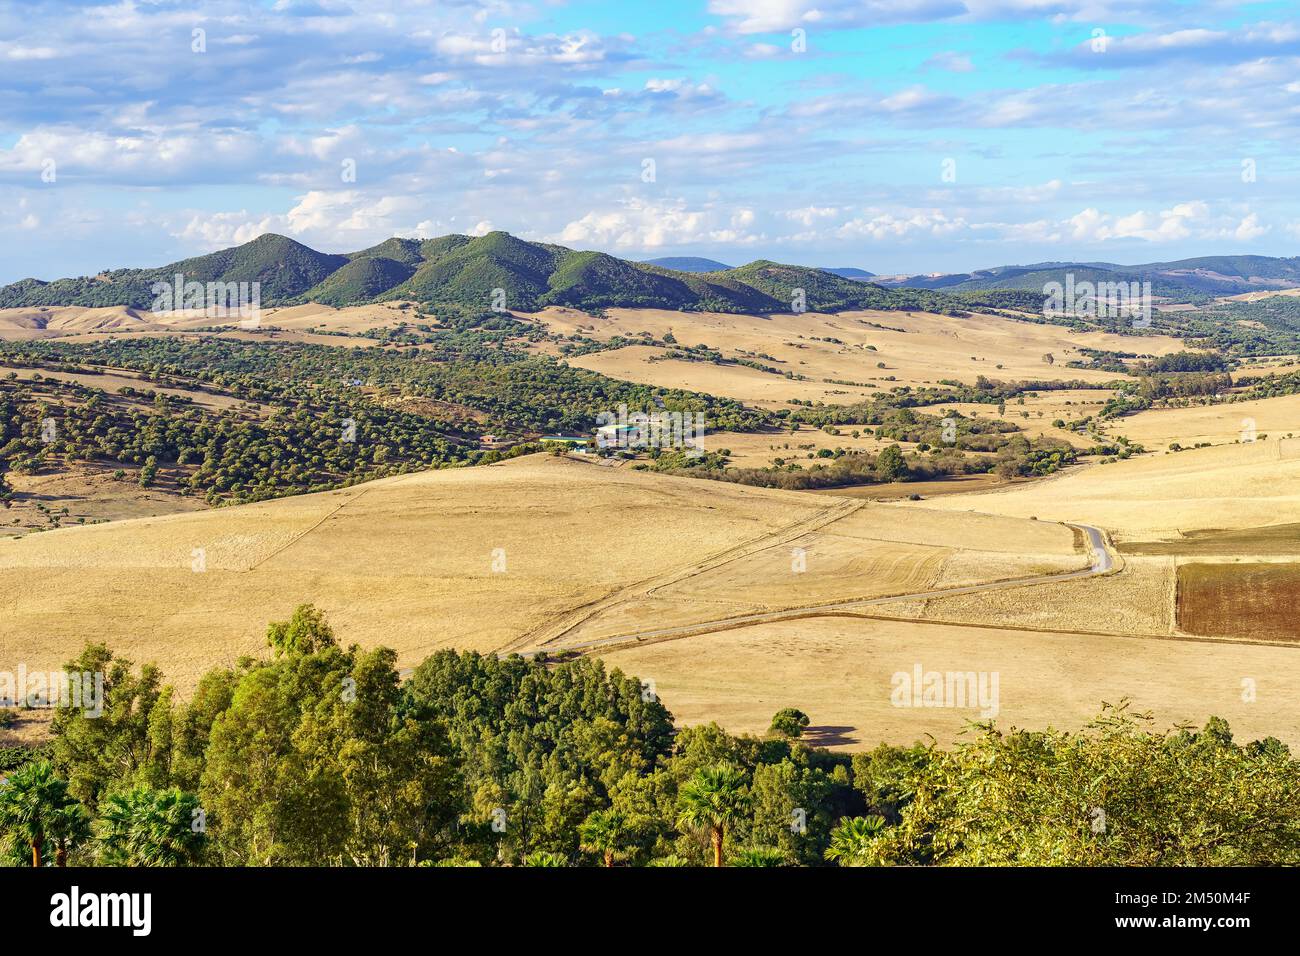 Landscape of countryside and mountains in the valley of the Sierra de Grazalema in Cadiz, Spain. Stock Photo